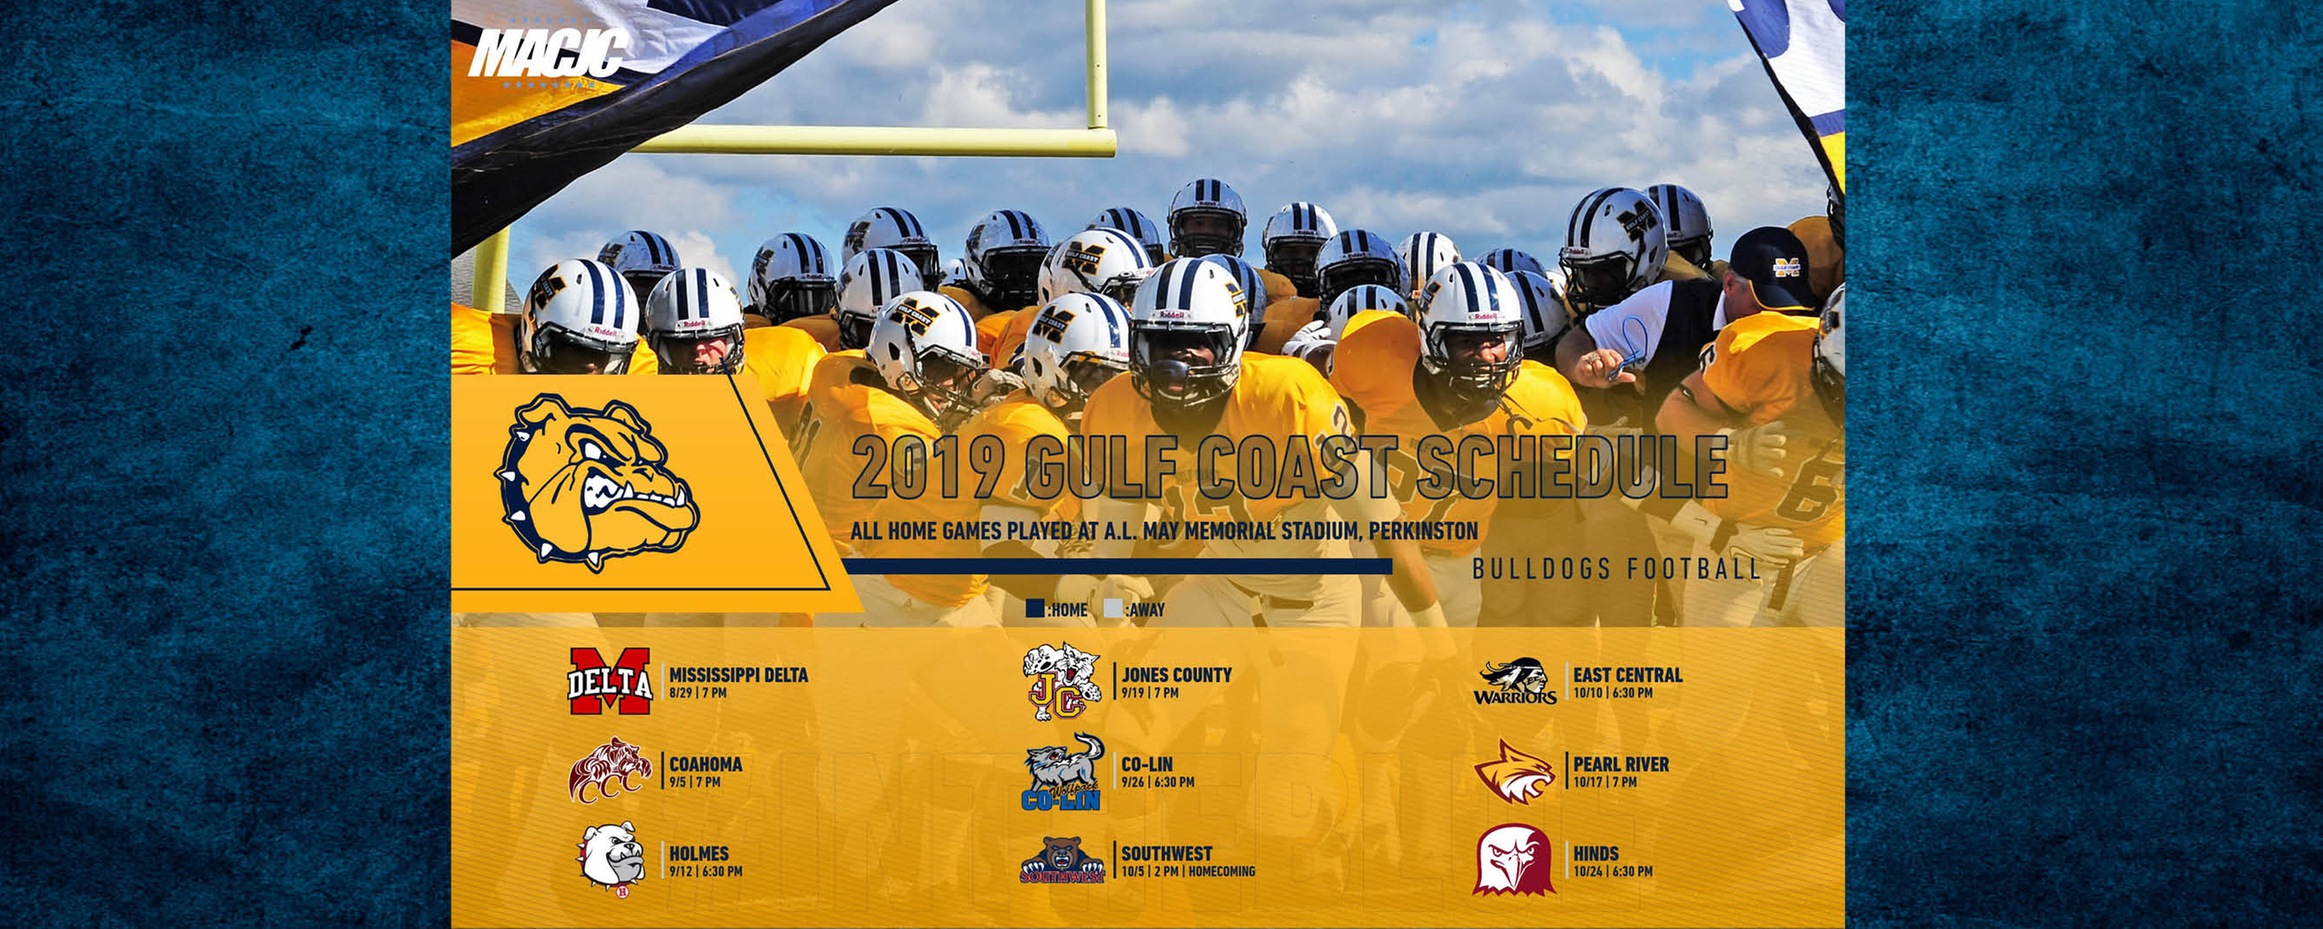 MGCCC releases football schedule